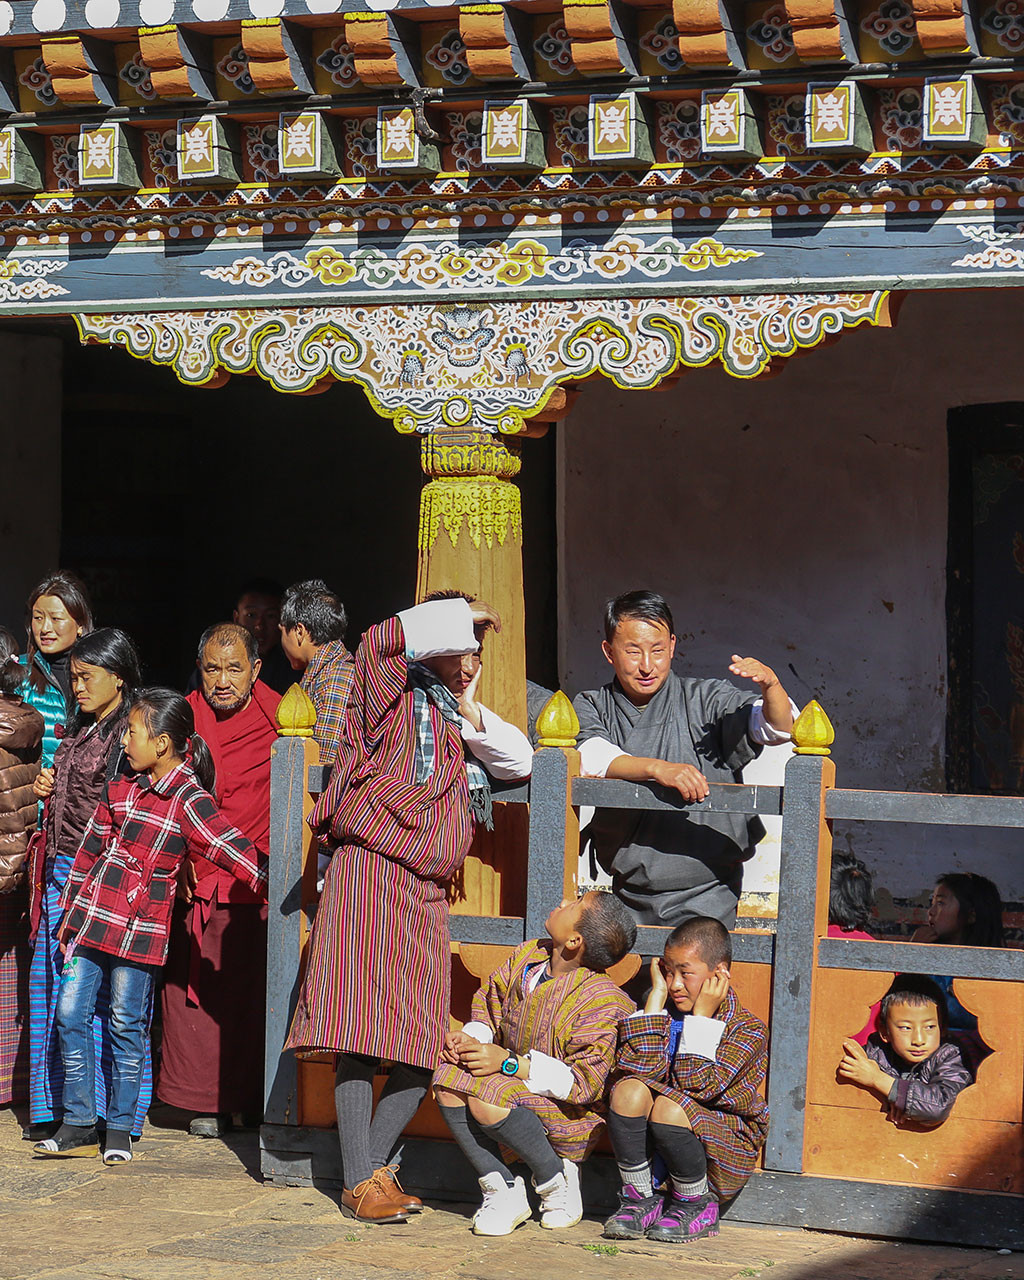 Waiting for the rituals to begin, at the Jambay Lhakhang.